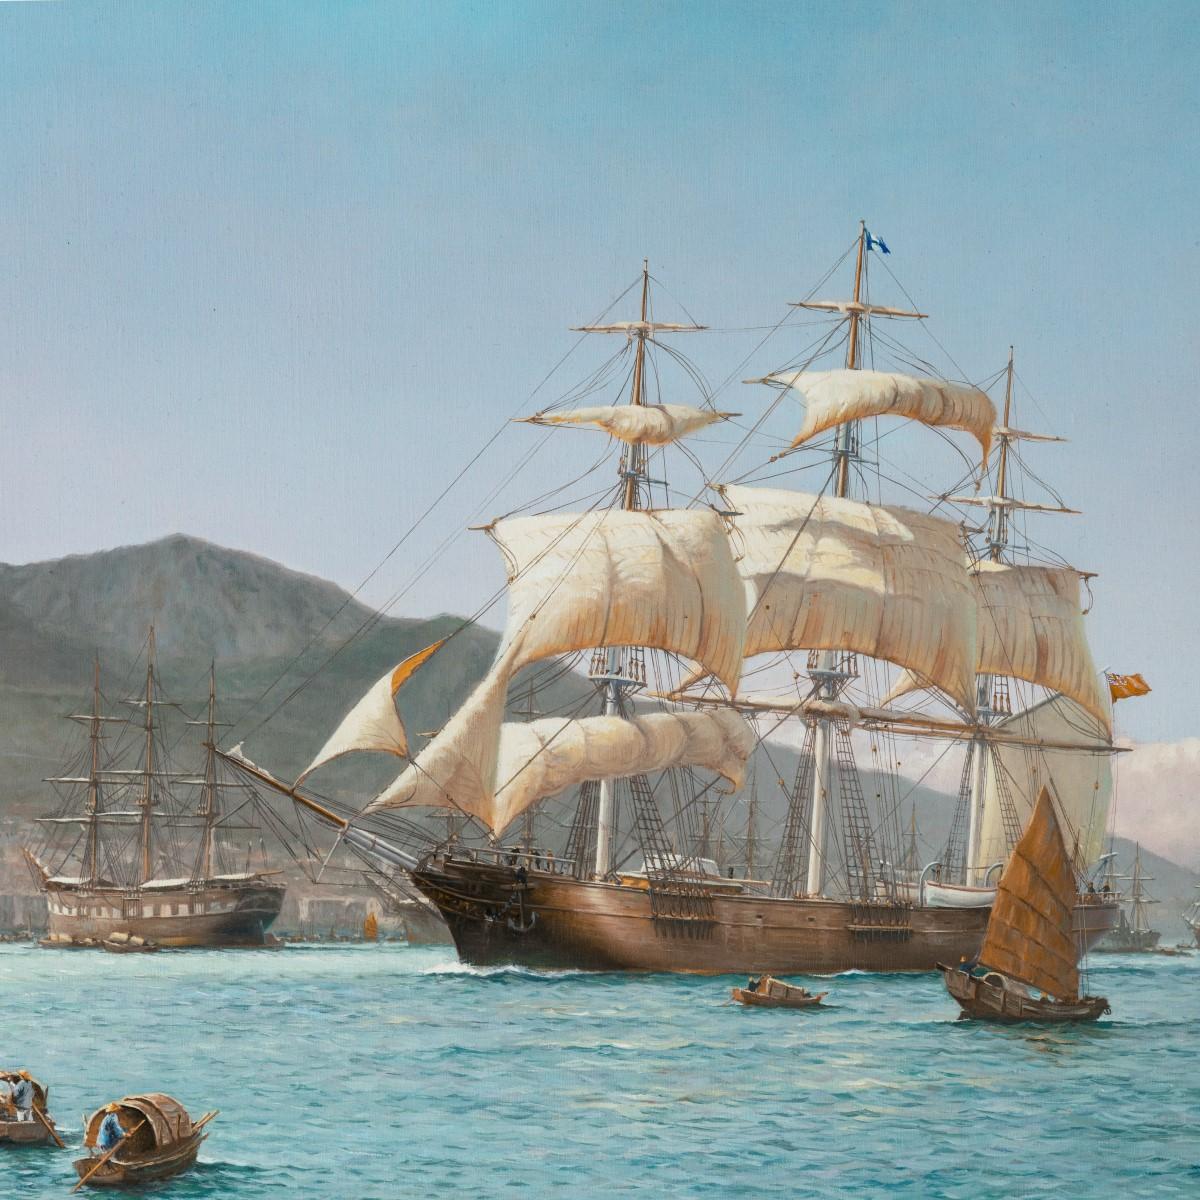 The Challenger Arrives off Kowloon Hong Kong, 23 May 1856, by Rodney Charman dated 1989, oil on canvas showing a large clipper under sail, junks and sampans, one unloading on a quay in the foreground while numerous other 3-masted ships lie at anchor